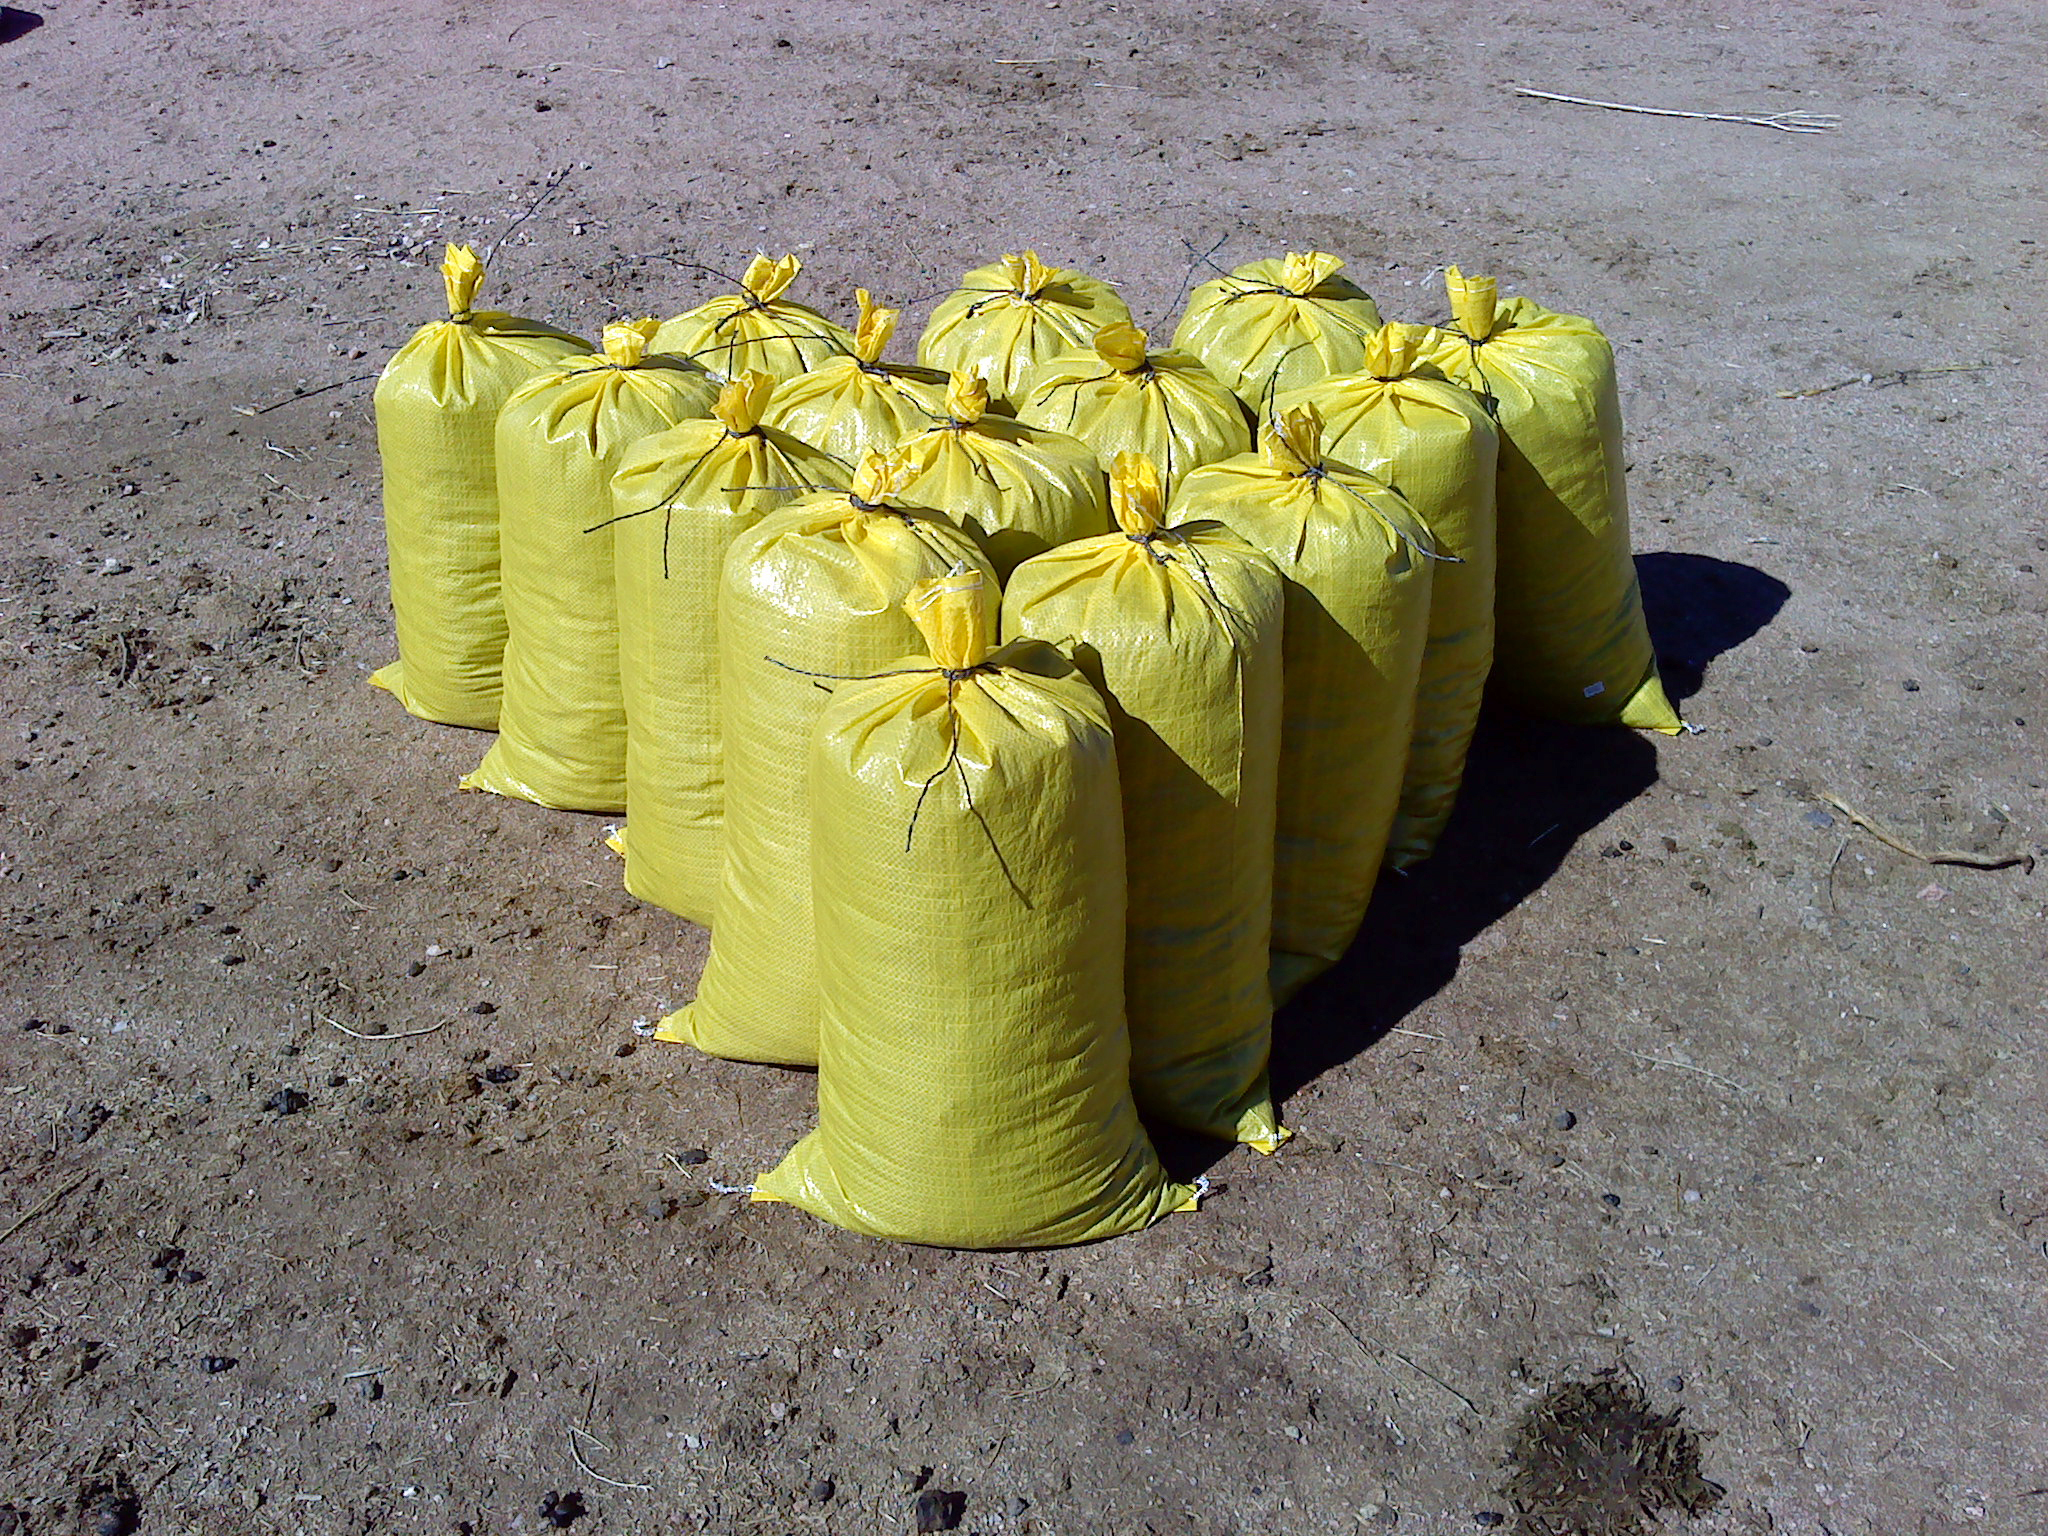 Old feed bags used to transport bulk manure